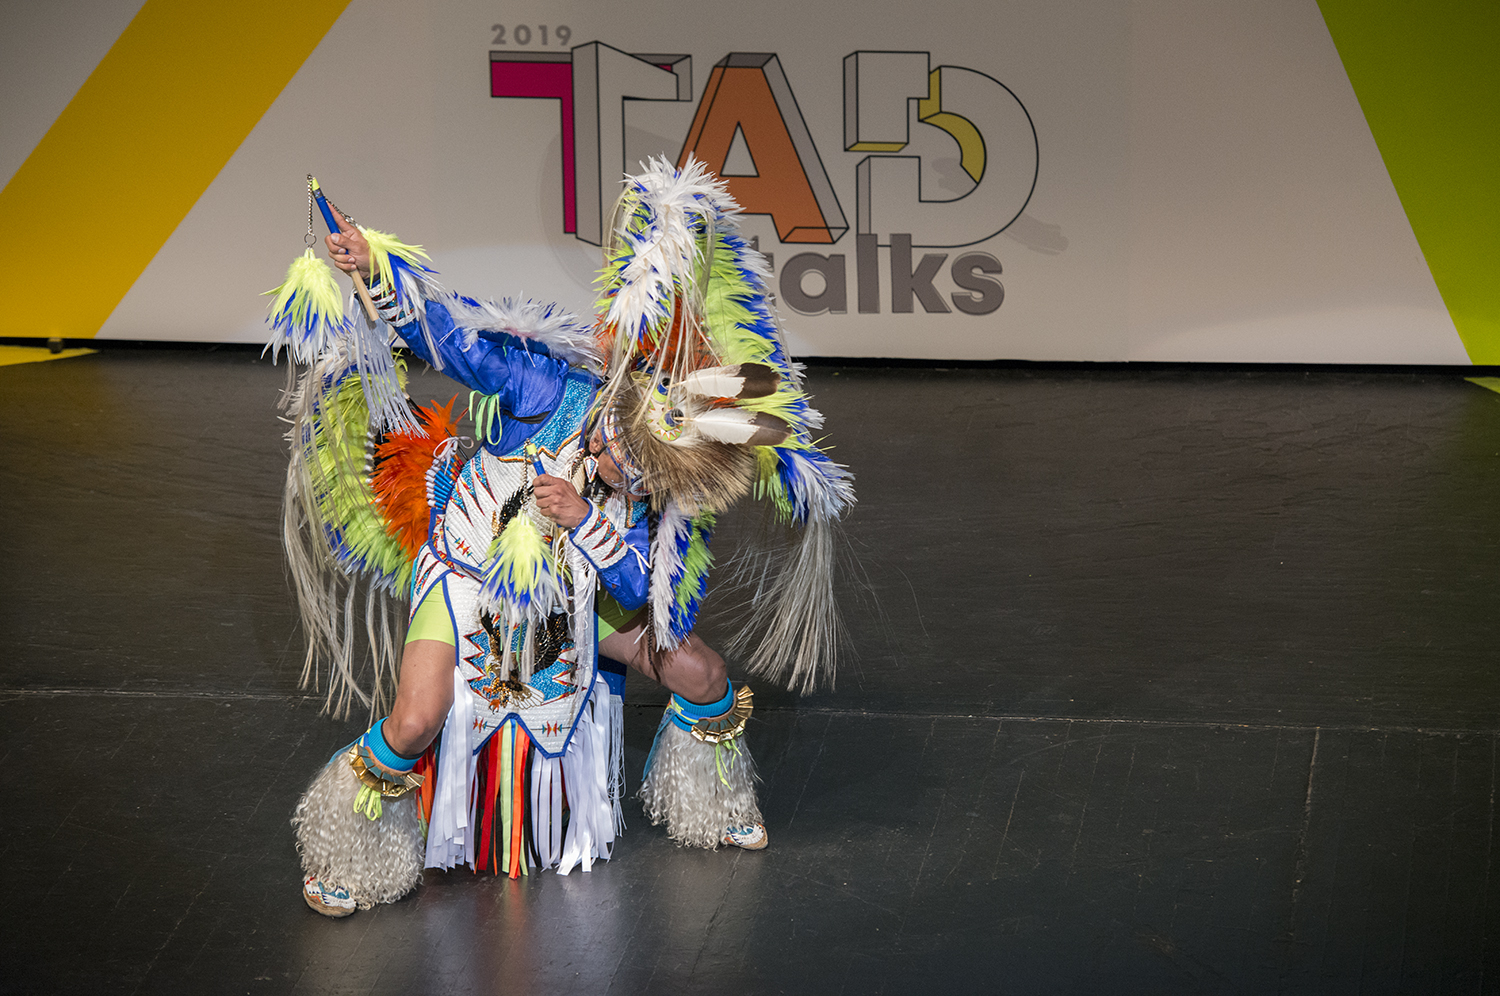 Larry Yazzie, native pride dancer, performed at the 2019 TAD Talks.